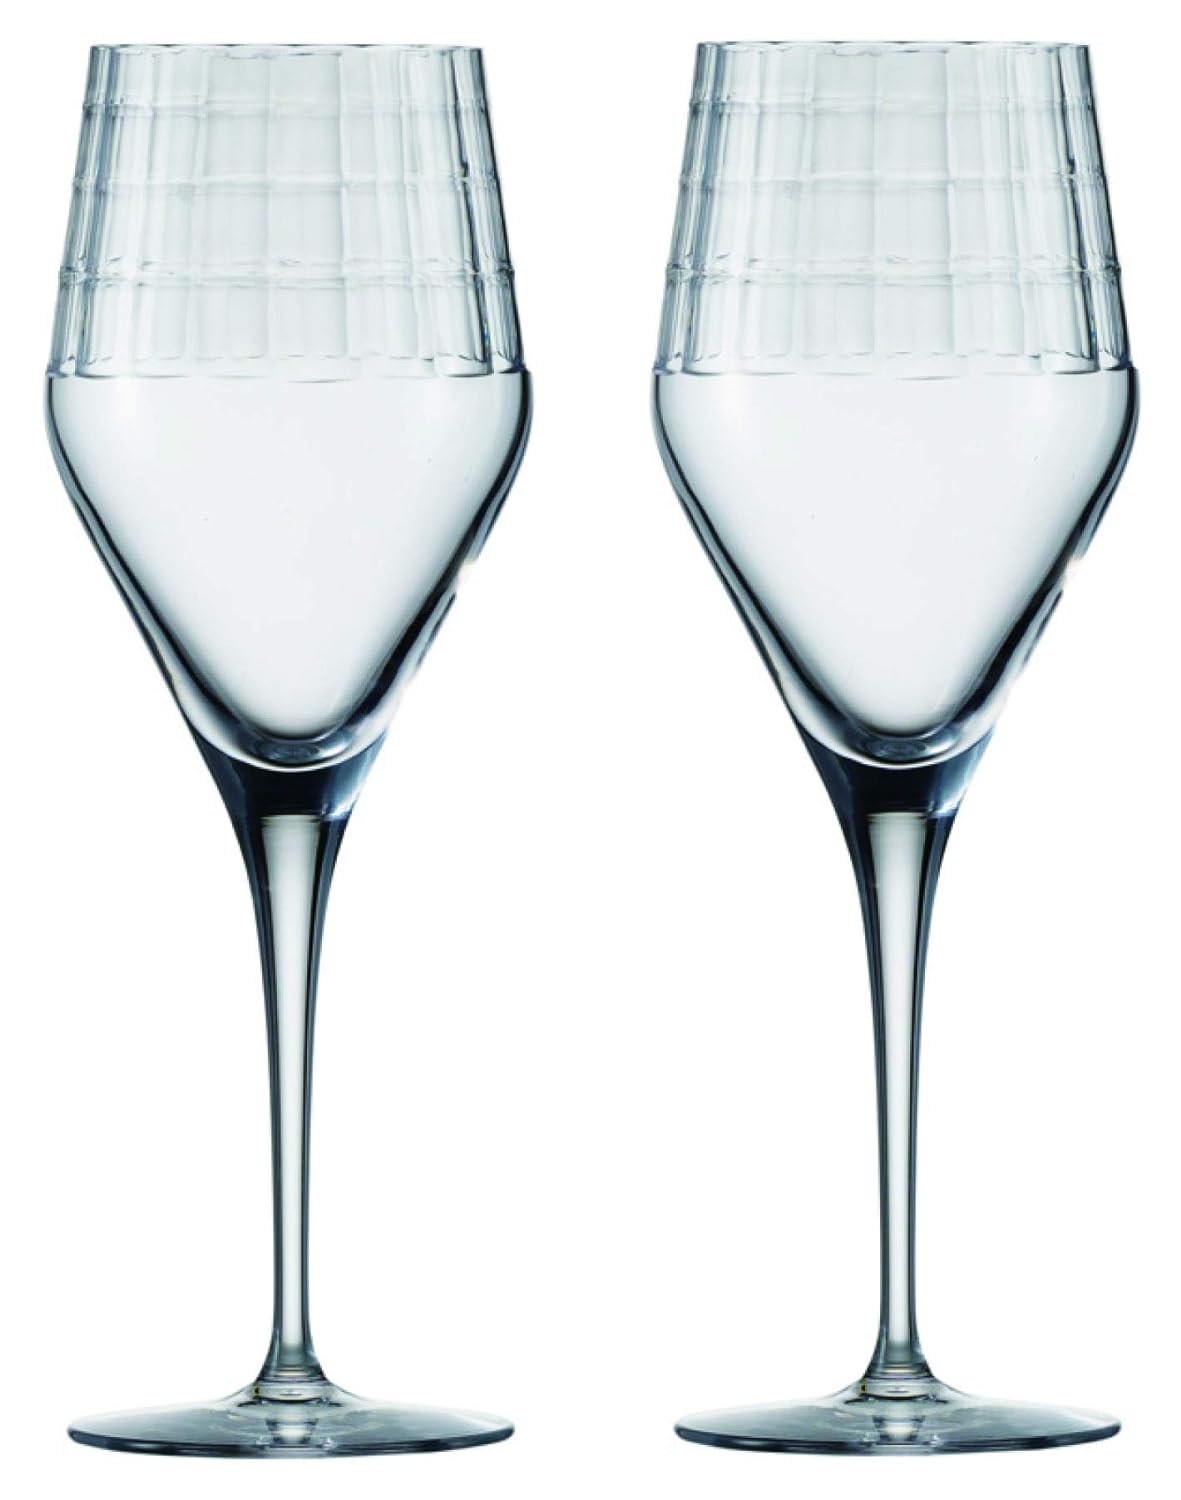 Zwiesel 1872 117155 Red Wine Glass, Glass, Transparent, 2 Units